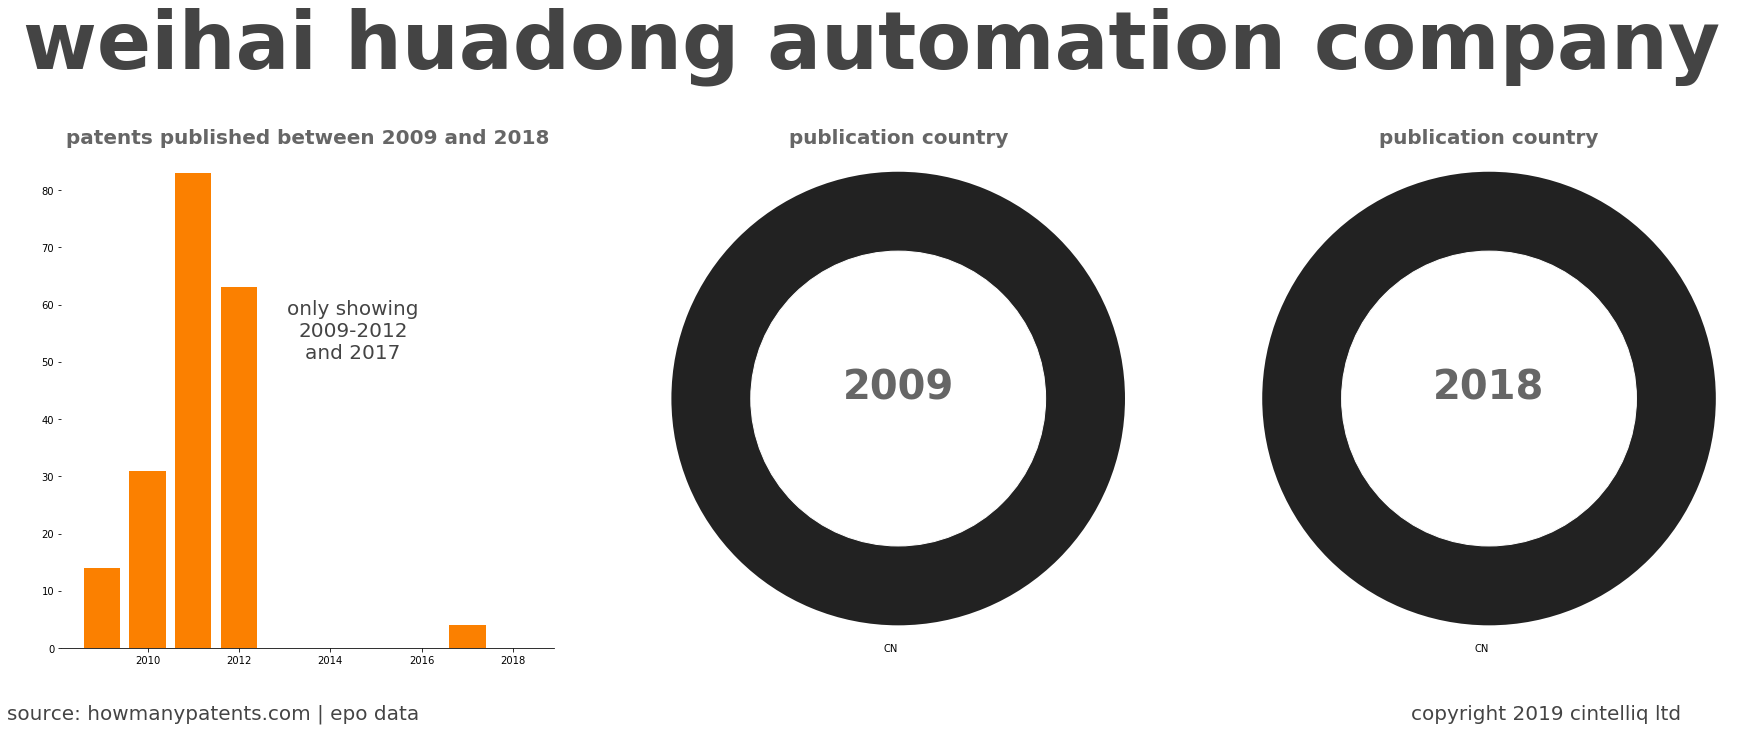 summary of patents for Weihai Huadong Automation Company